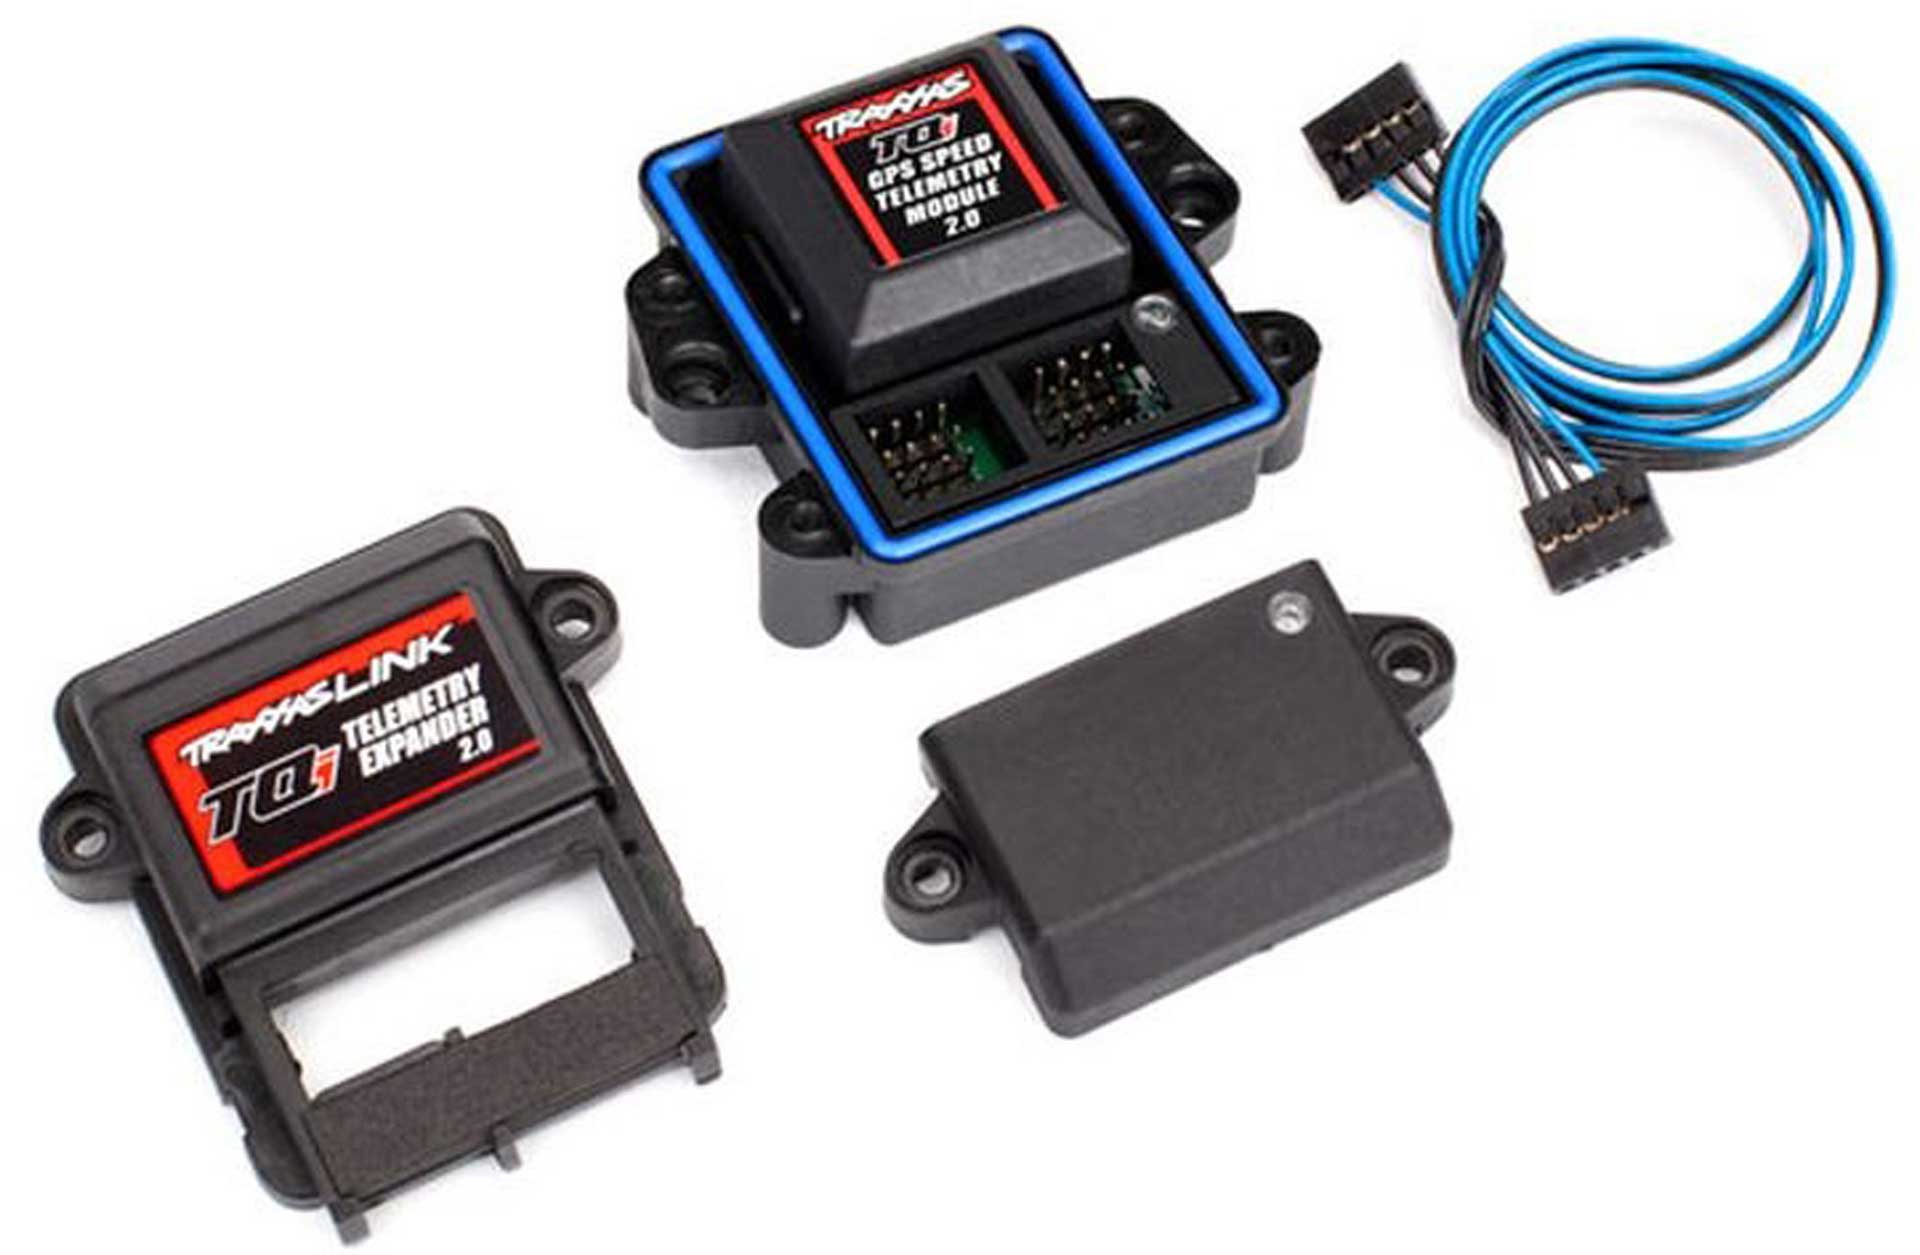 TRAXXAS Telemetry Expander 2.0 and GPS module 2.0, TQi radio system